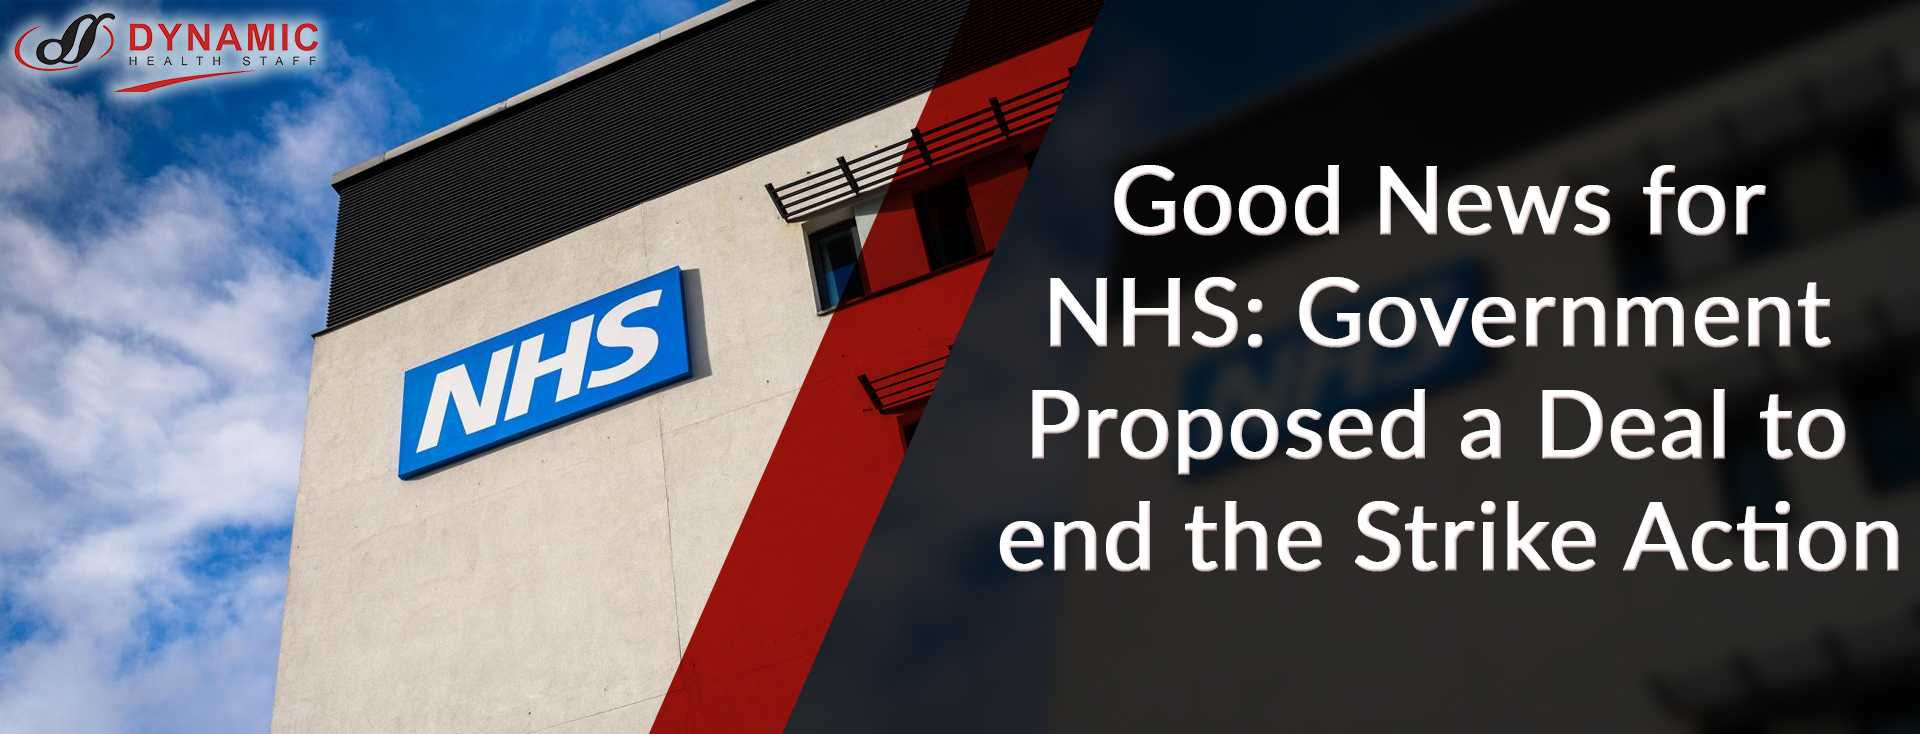 Good News for NHS Government Proposed a Deal to end the Strike Action